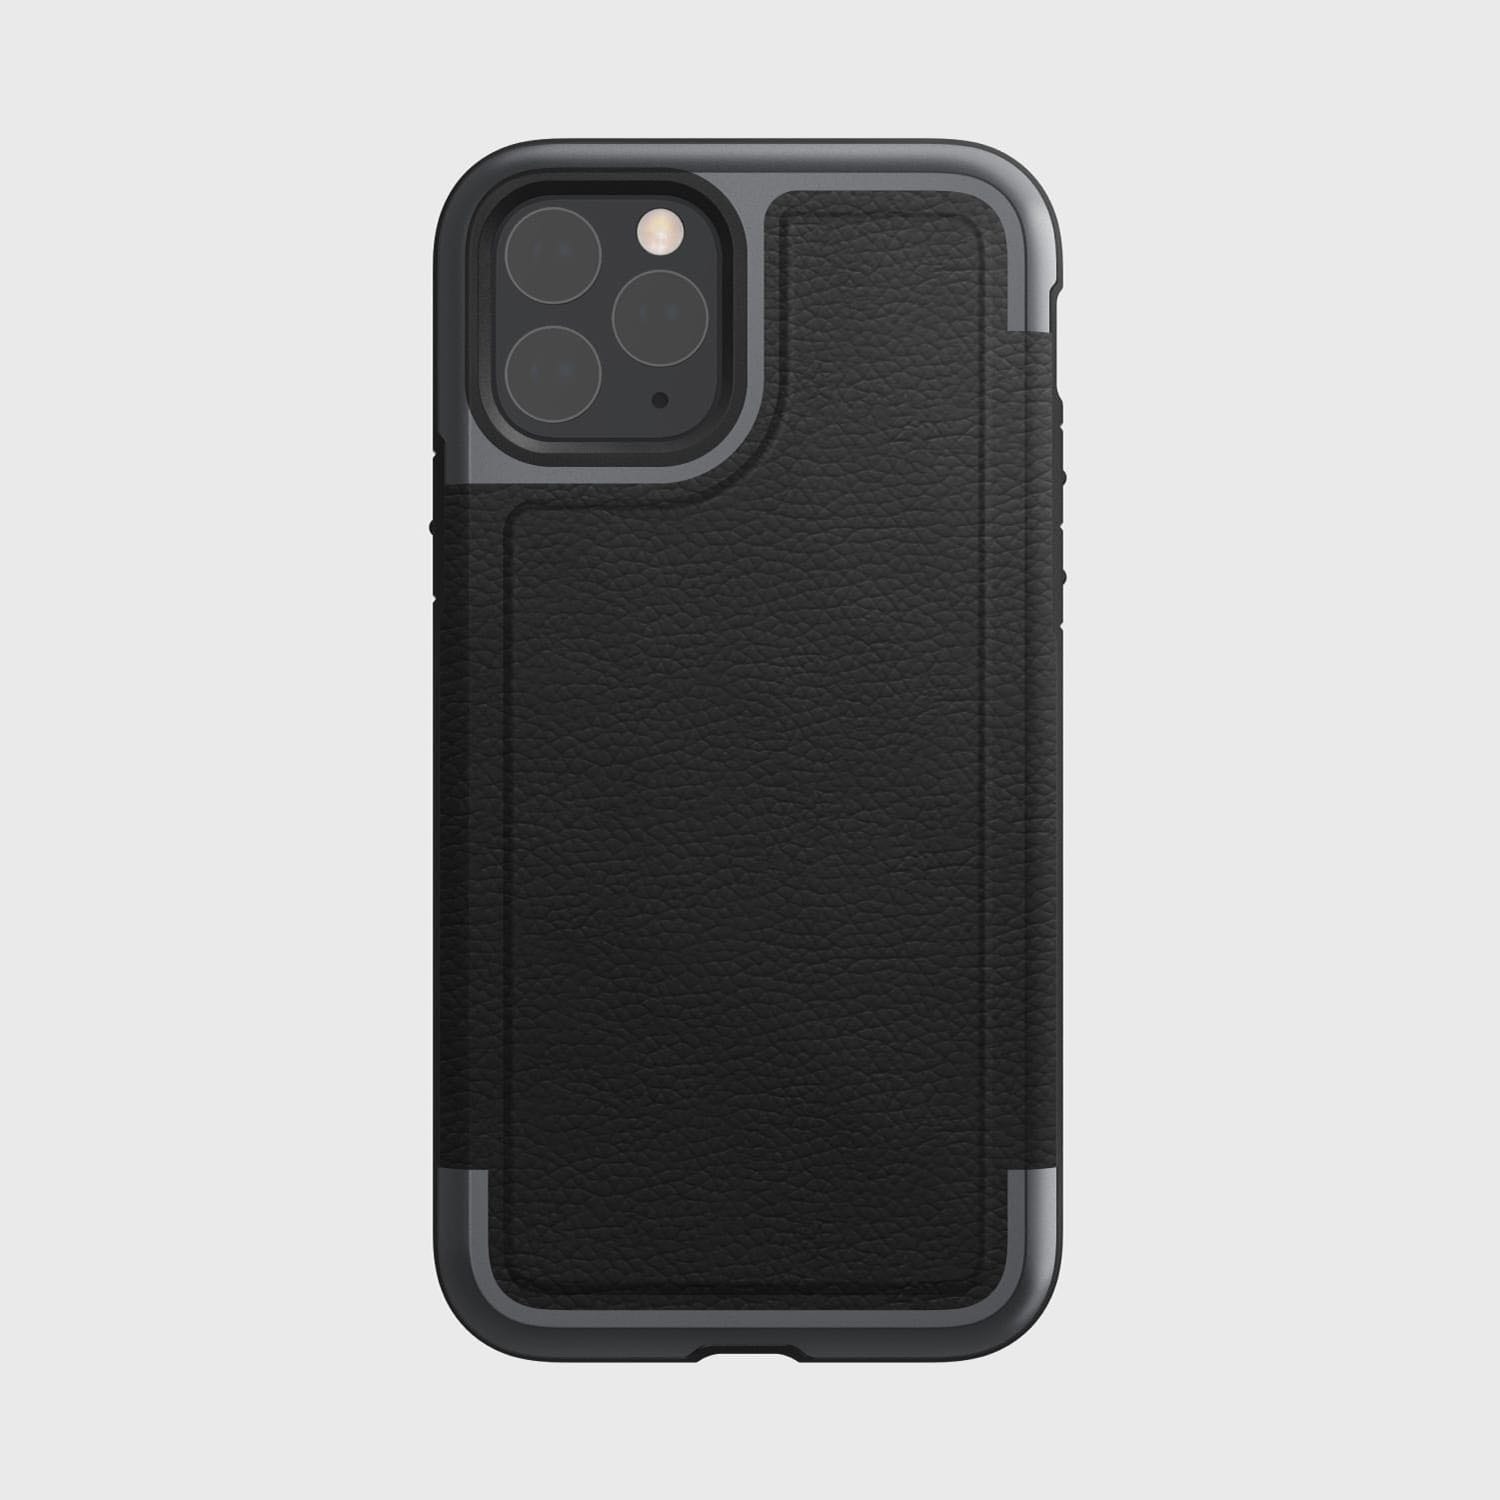 The black iPhone 11 Case - PRIME by Raptic is shown on a white background.